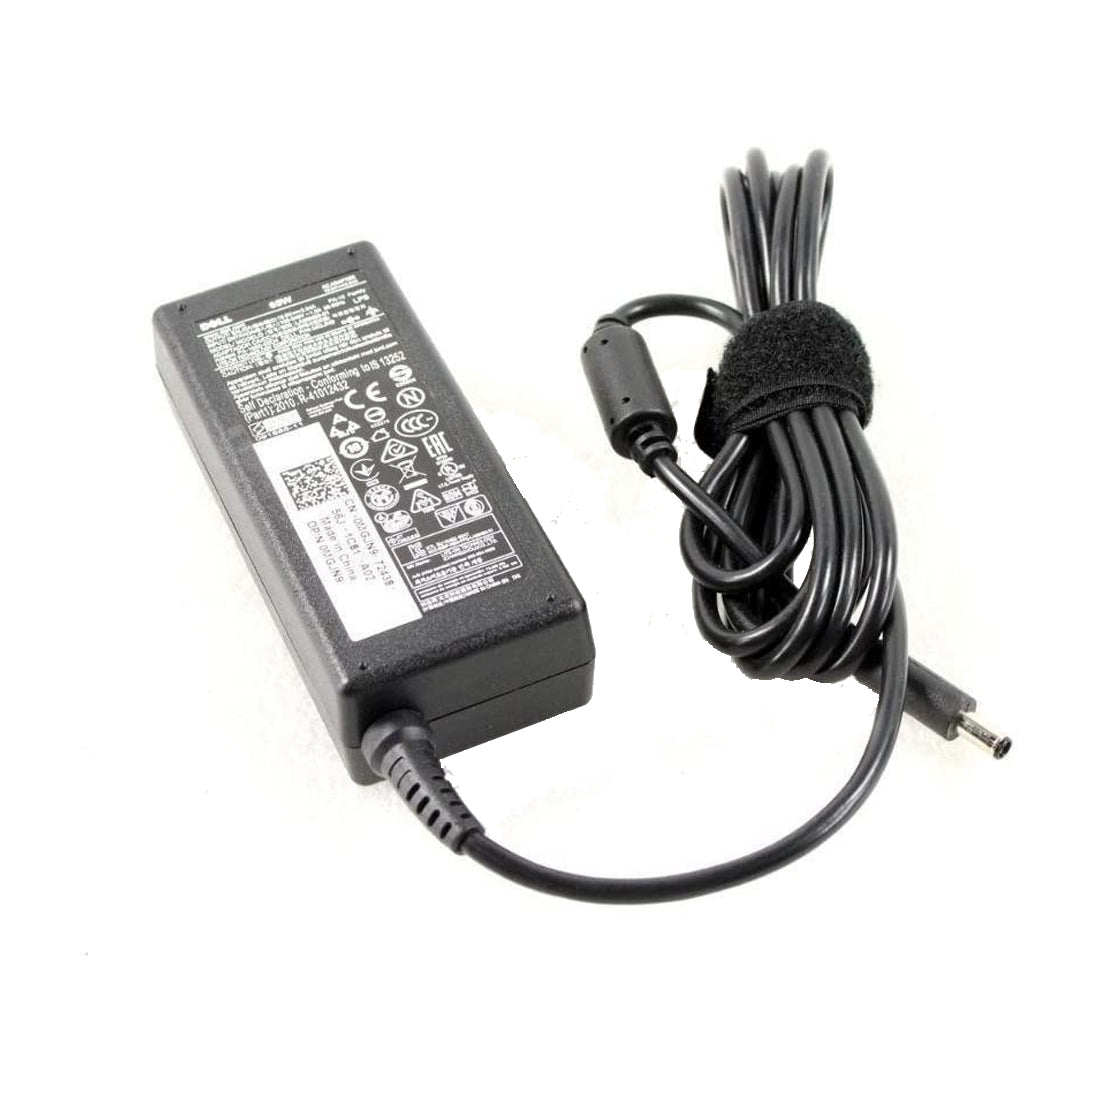 Dell Original 65W 19.5V 4.5mm Pin Laptop Charger Adapter for Inspiron Desktop 24 3464 With Power Cord